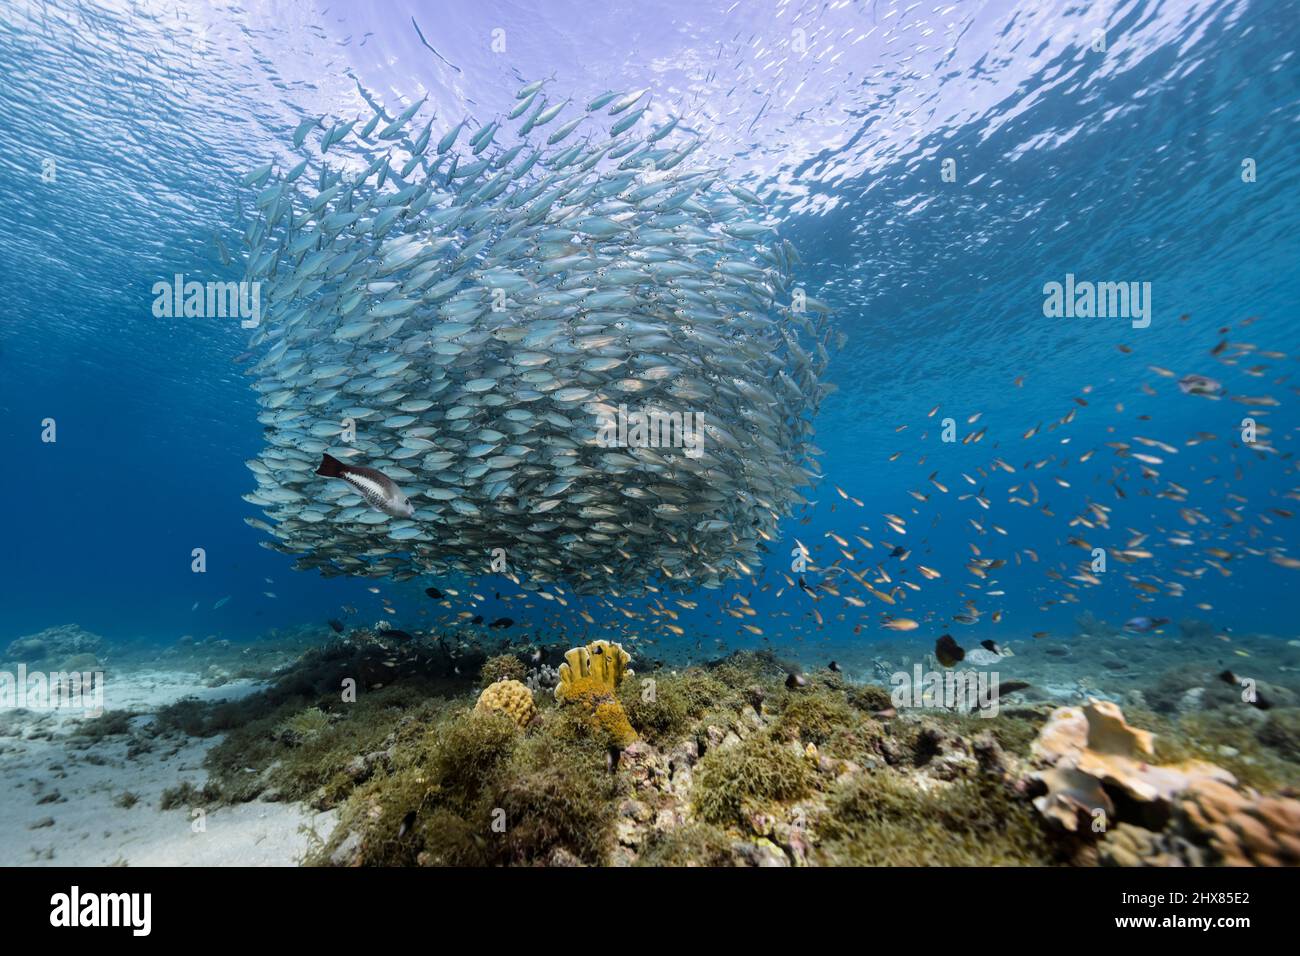 Seascape with Bait Ball, School of Fish, Mackerel fish in the coral reef of  the Caribbean Sea, Curacao Stock Photo - Alamy